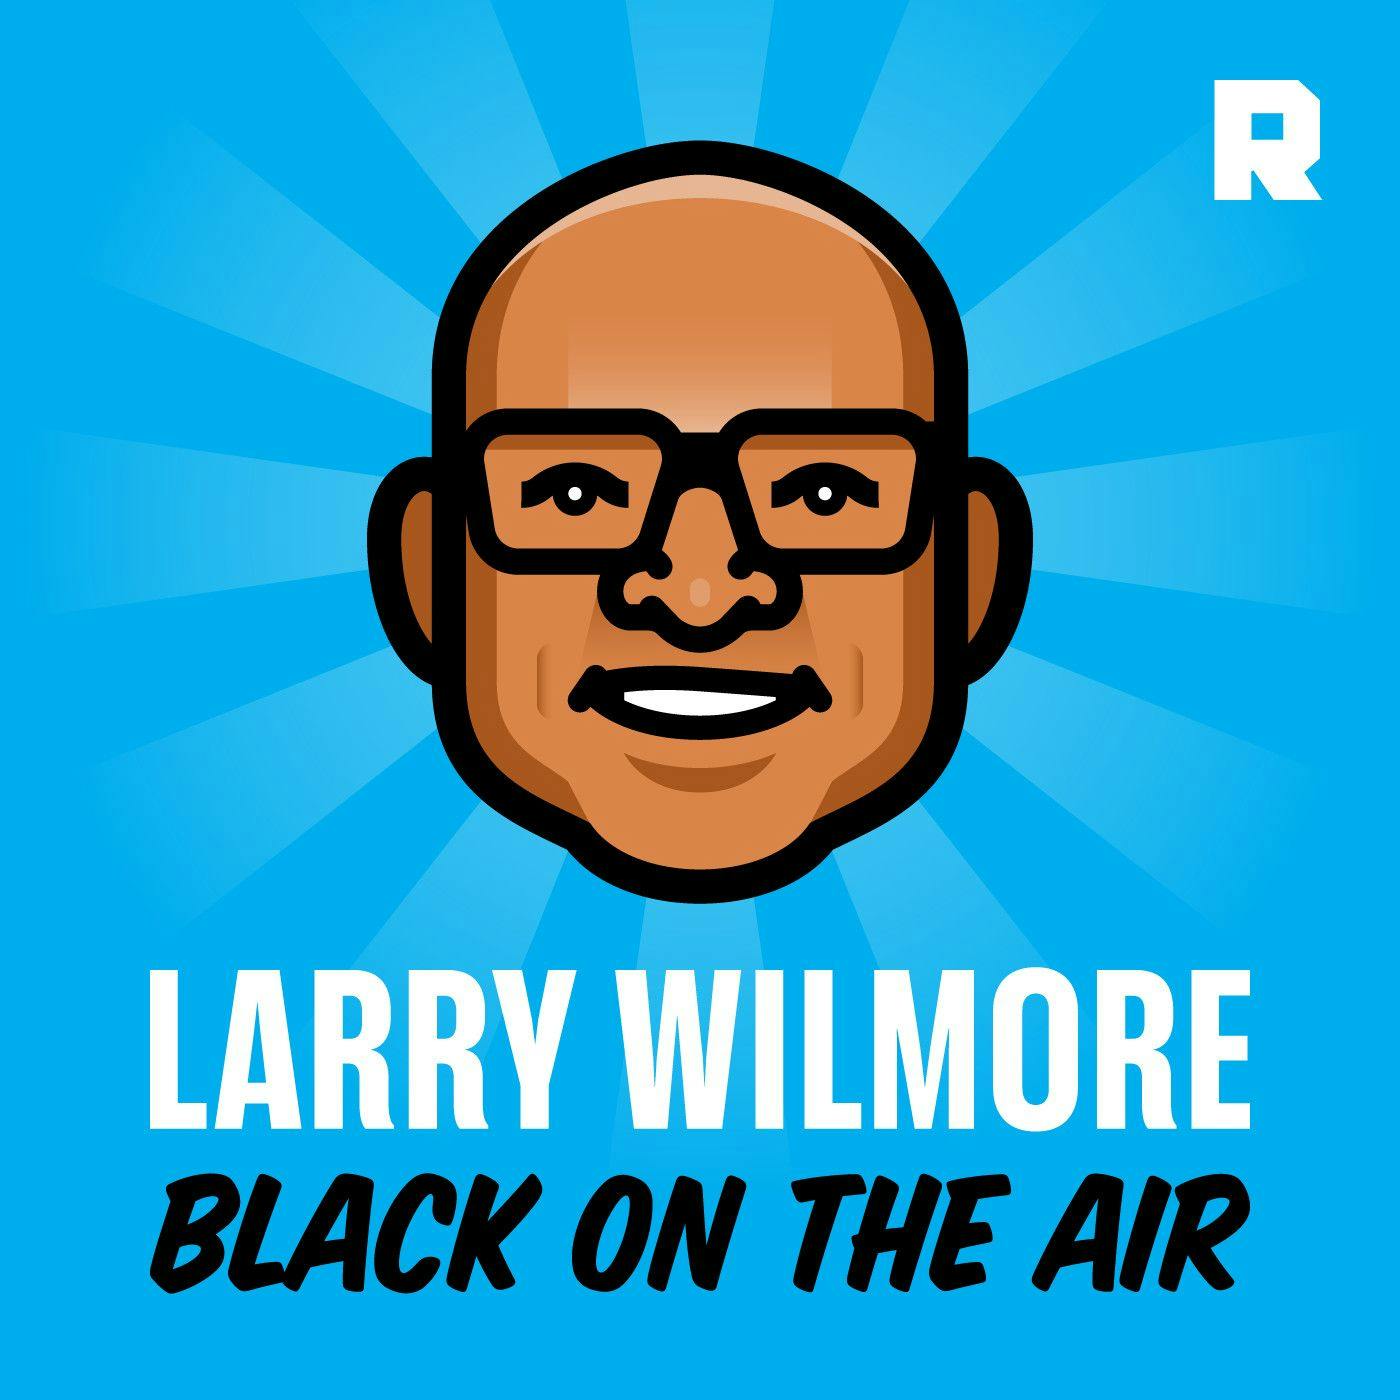 Brian Grazer on Growing Up With Dyslexia, Making Movies, and the Importance of Human Connection | Larry Wilmore: Black on the Air